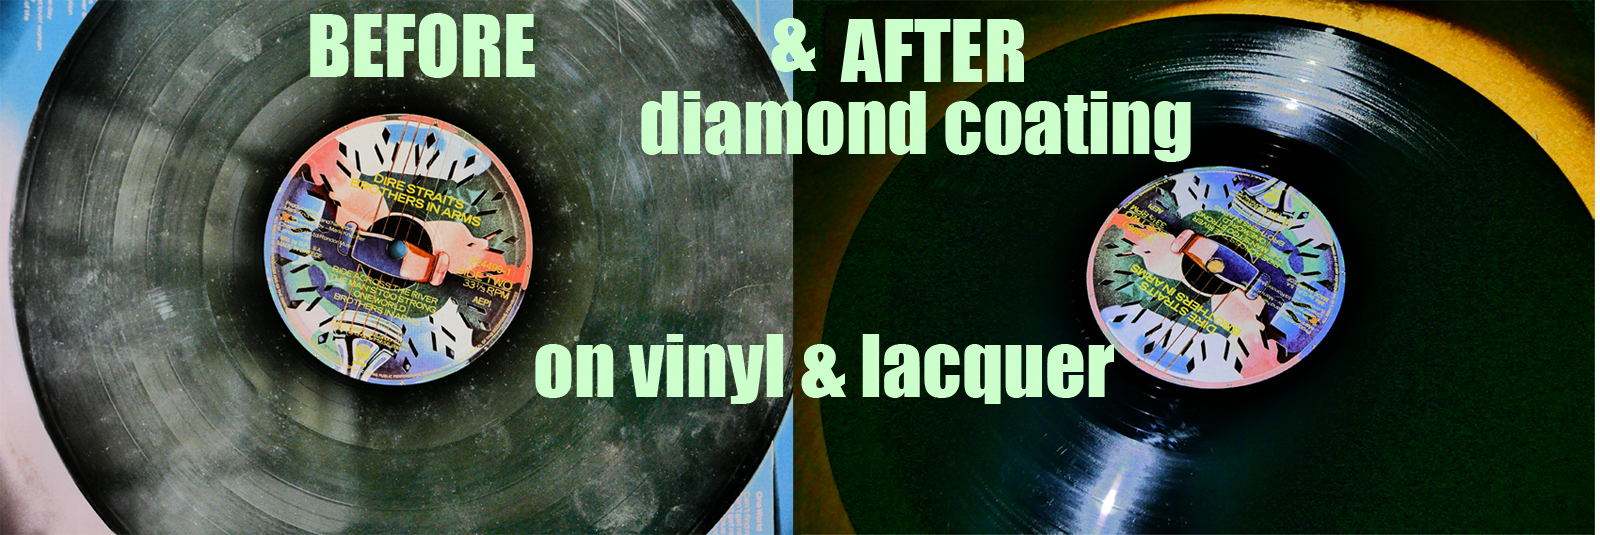 diamond coating on vinyl record and lacquer